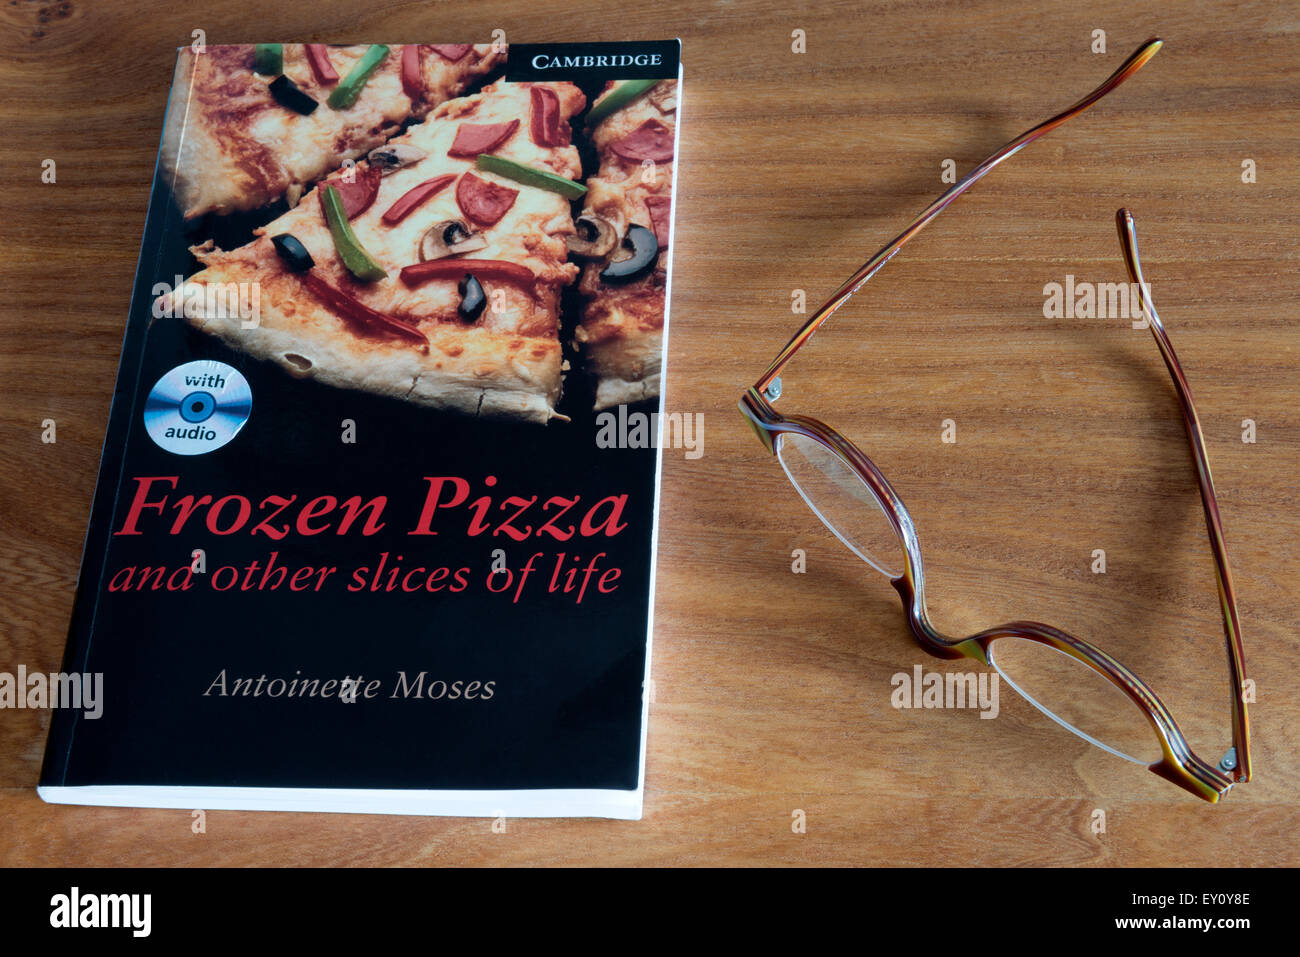 Frozen Pizza and other slices of life Stock Photo - Alamy